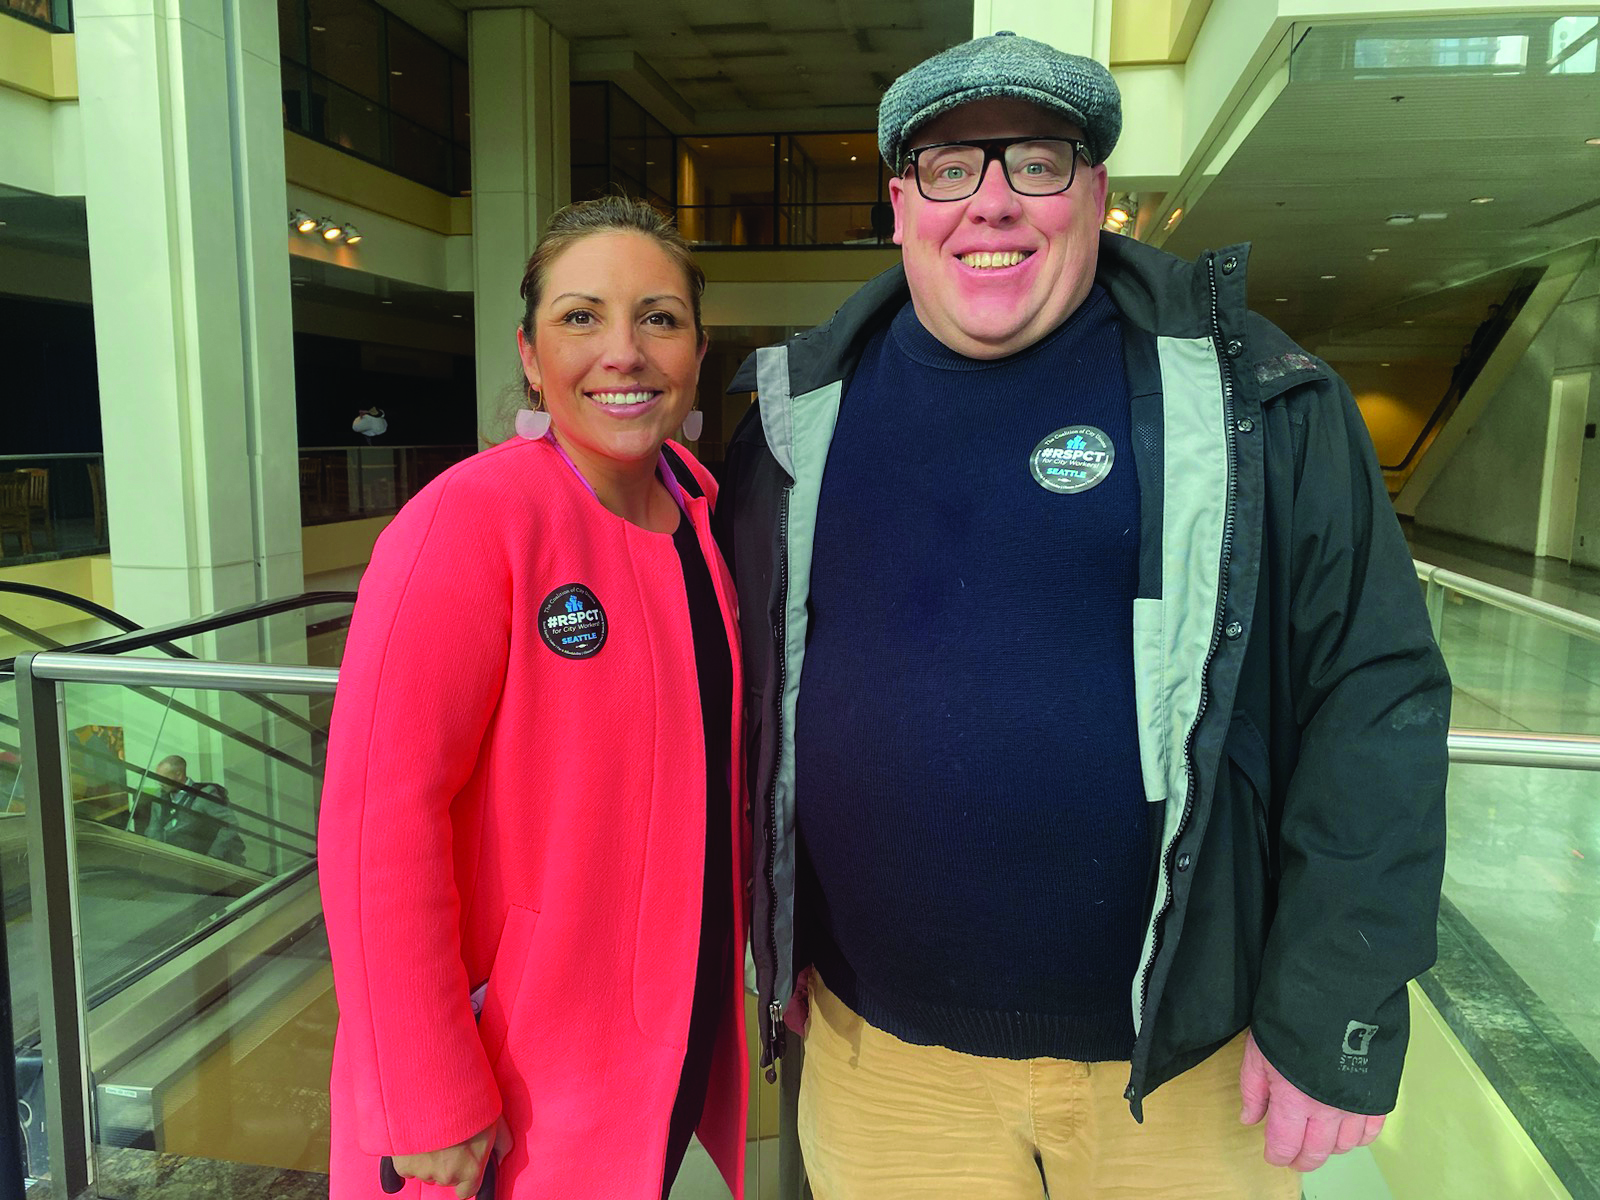 Jamie Fackler, Seattle Steward and member of the Contract Action Team, poses with Seattle City Councilmember Teresa Mosqueda wearing their #RSPCTforCityWorkers stickers.